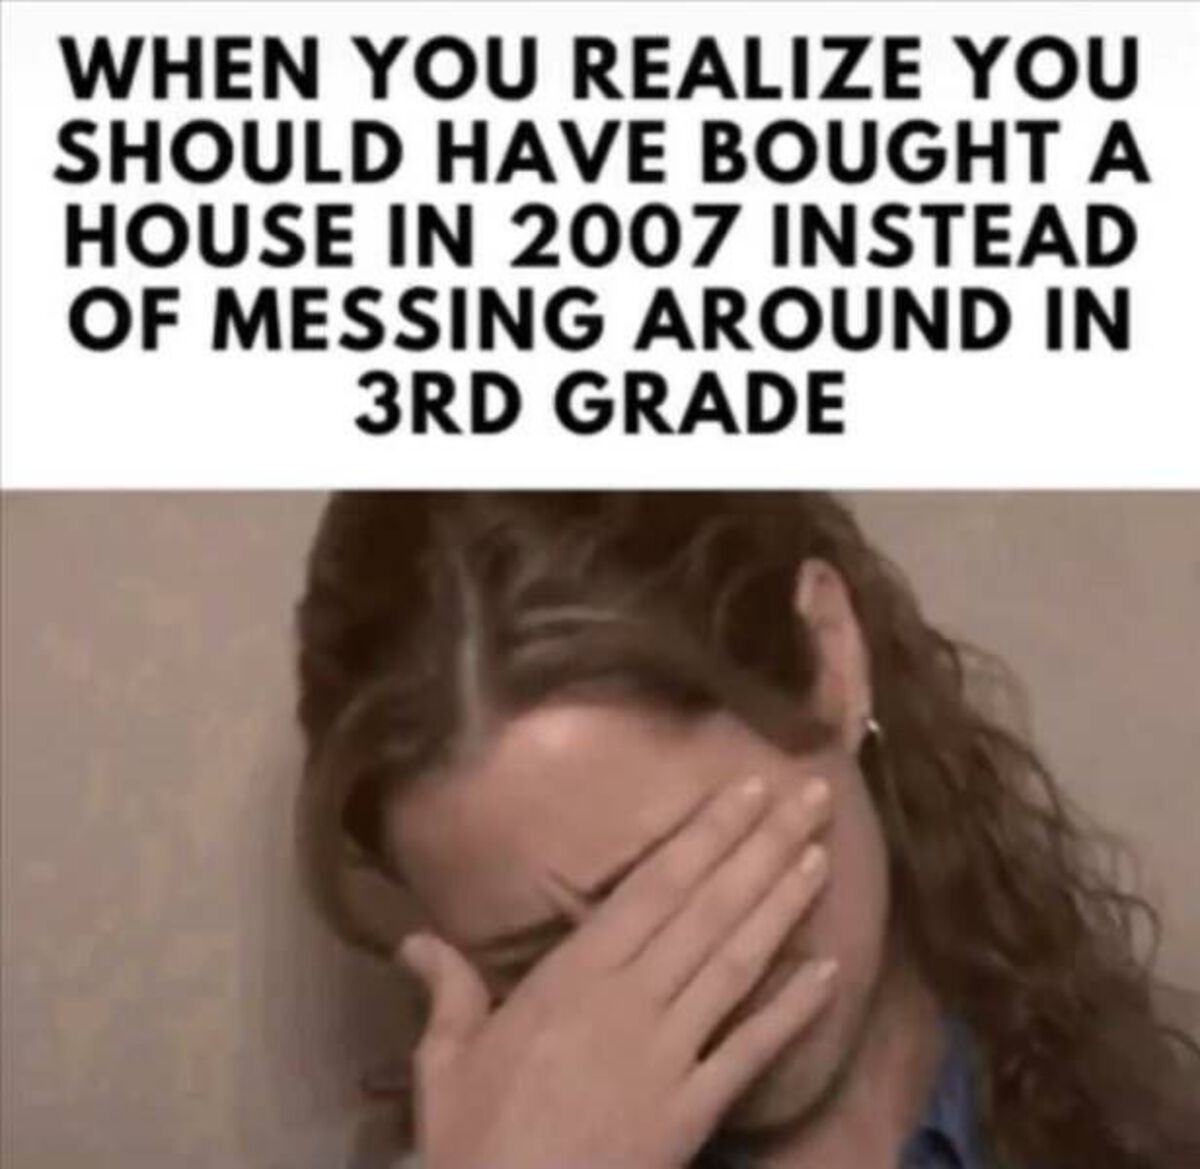 should ve bought house - When You Realize You Should Have Bought A House In 2007 Instead Of Messing Around In 3RD Grade